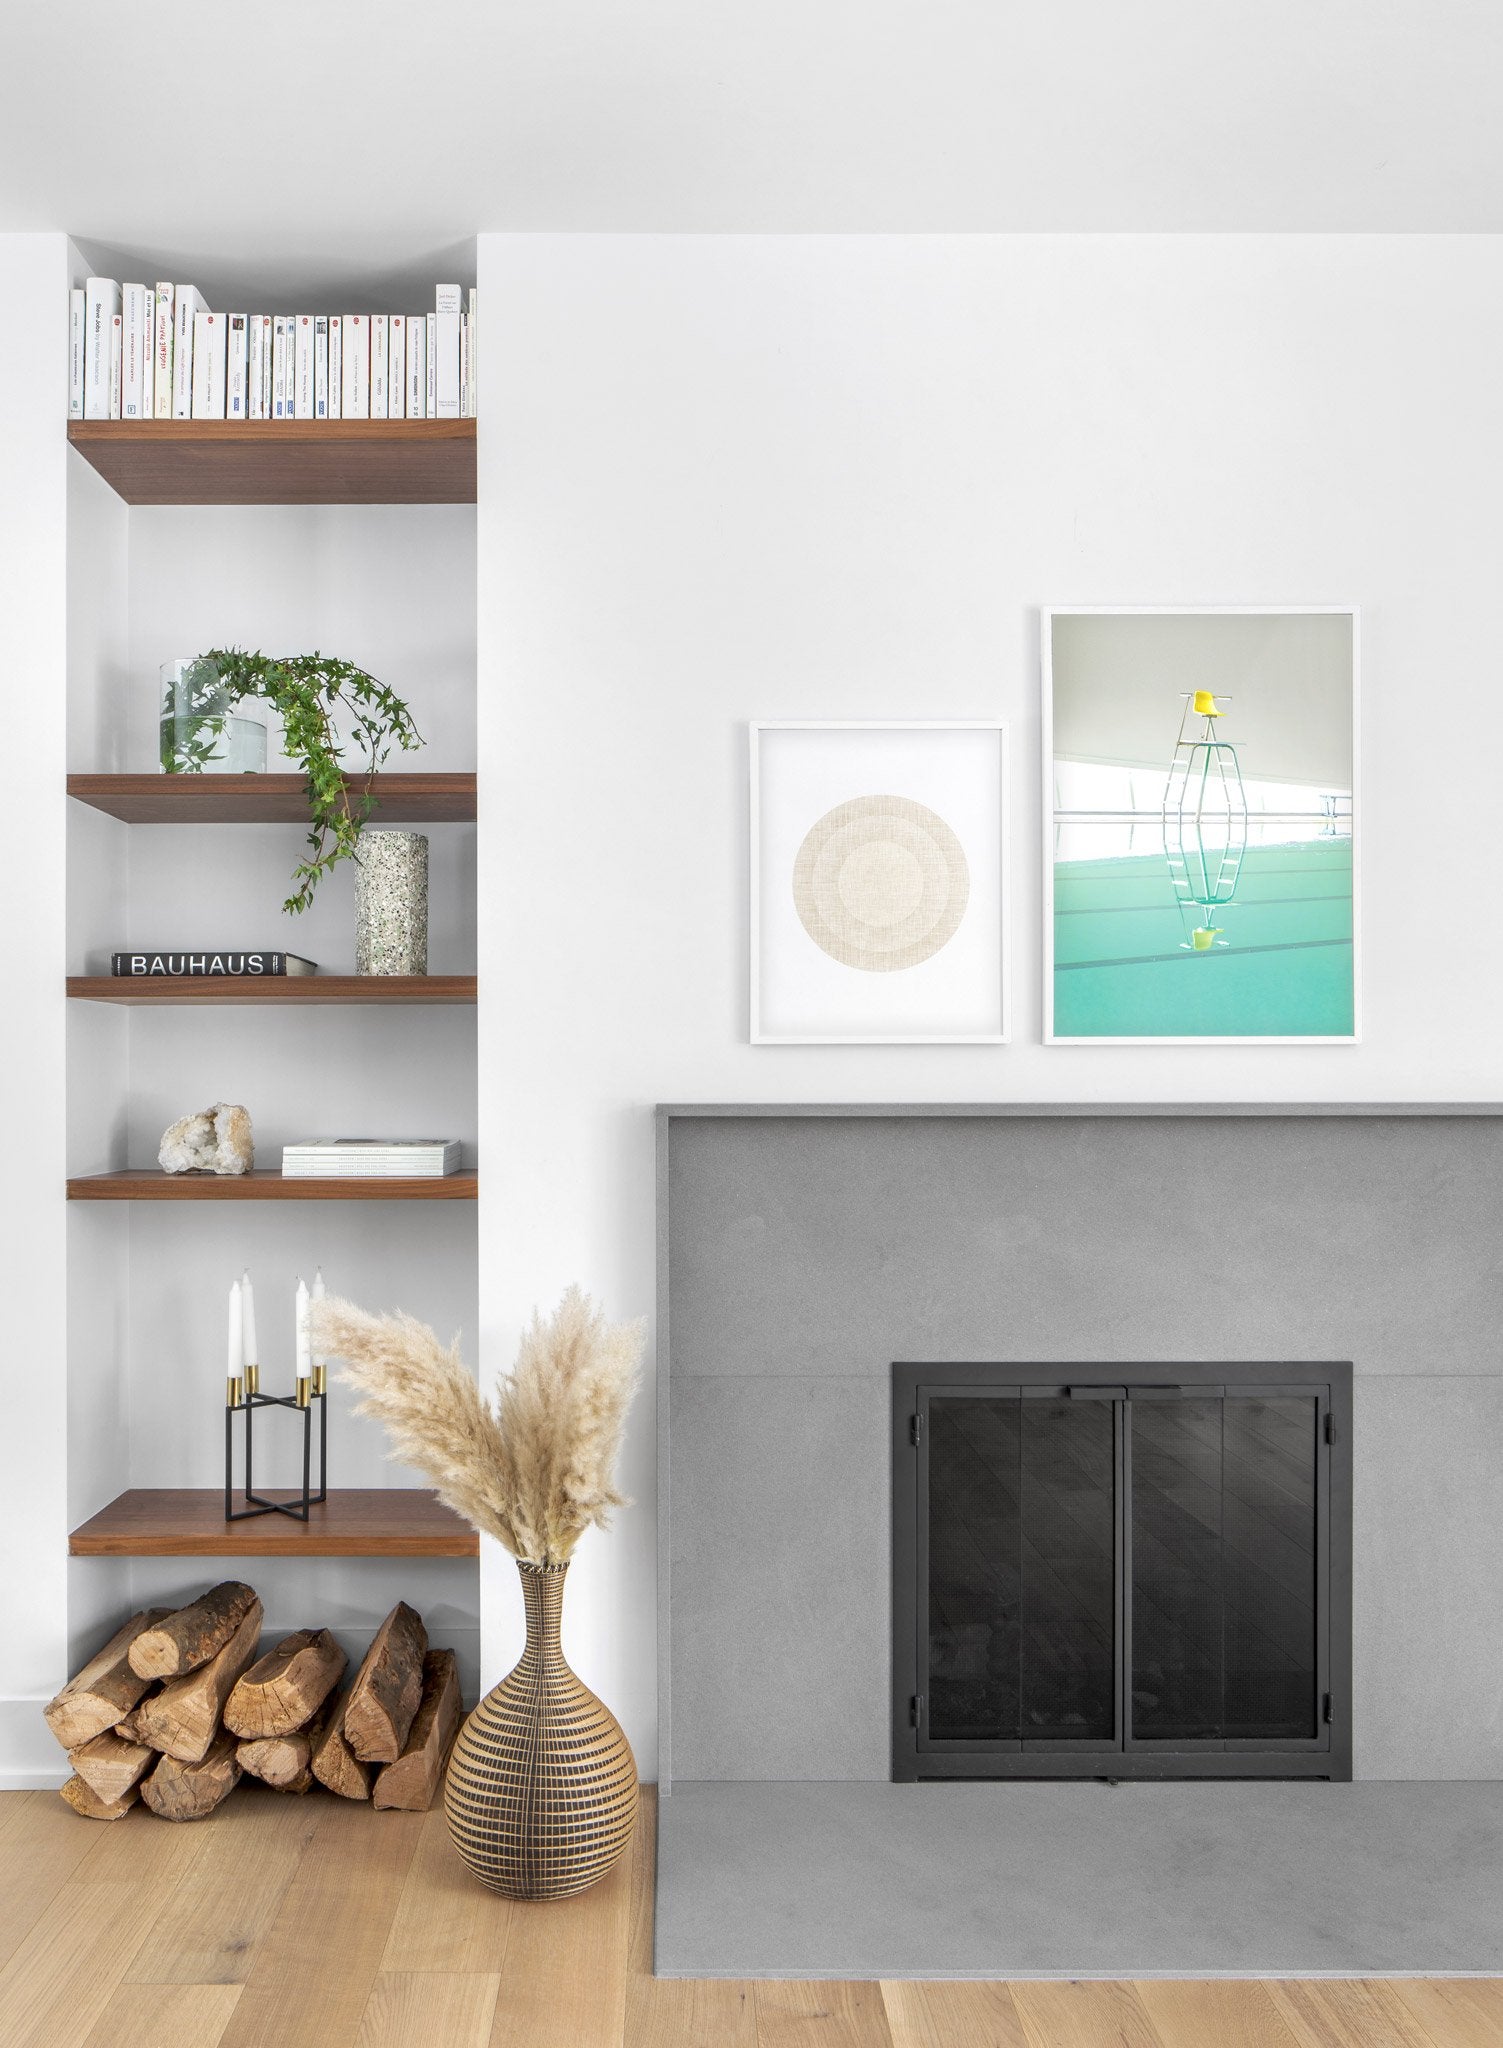 Lifeguard chair modern minimalist photography poster by Opposite Wall - Fireplace - Duo